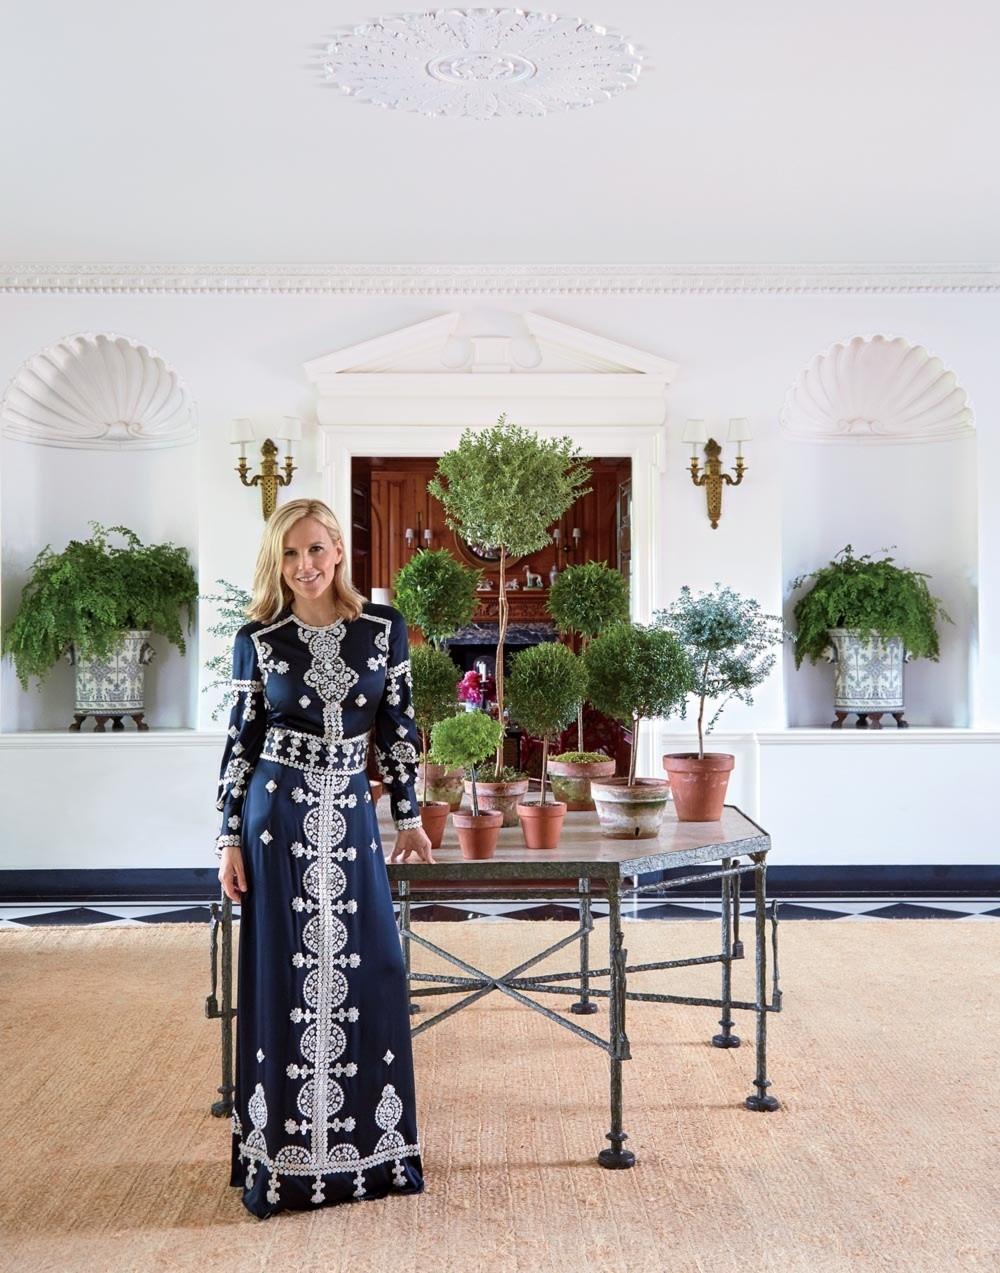 Everything You Need to Know About Tory Burch's Intimate Antigua